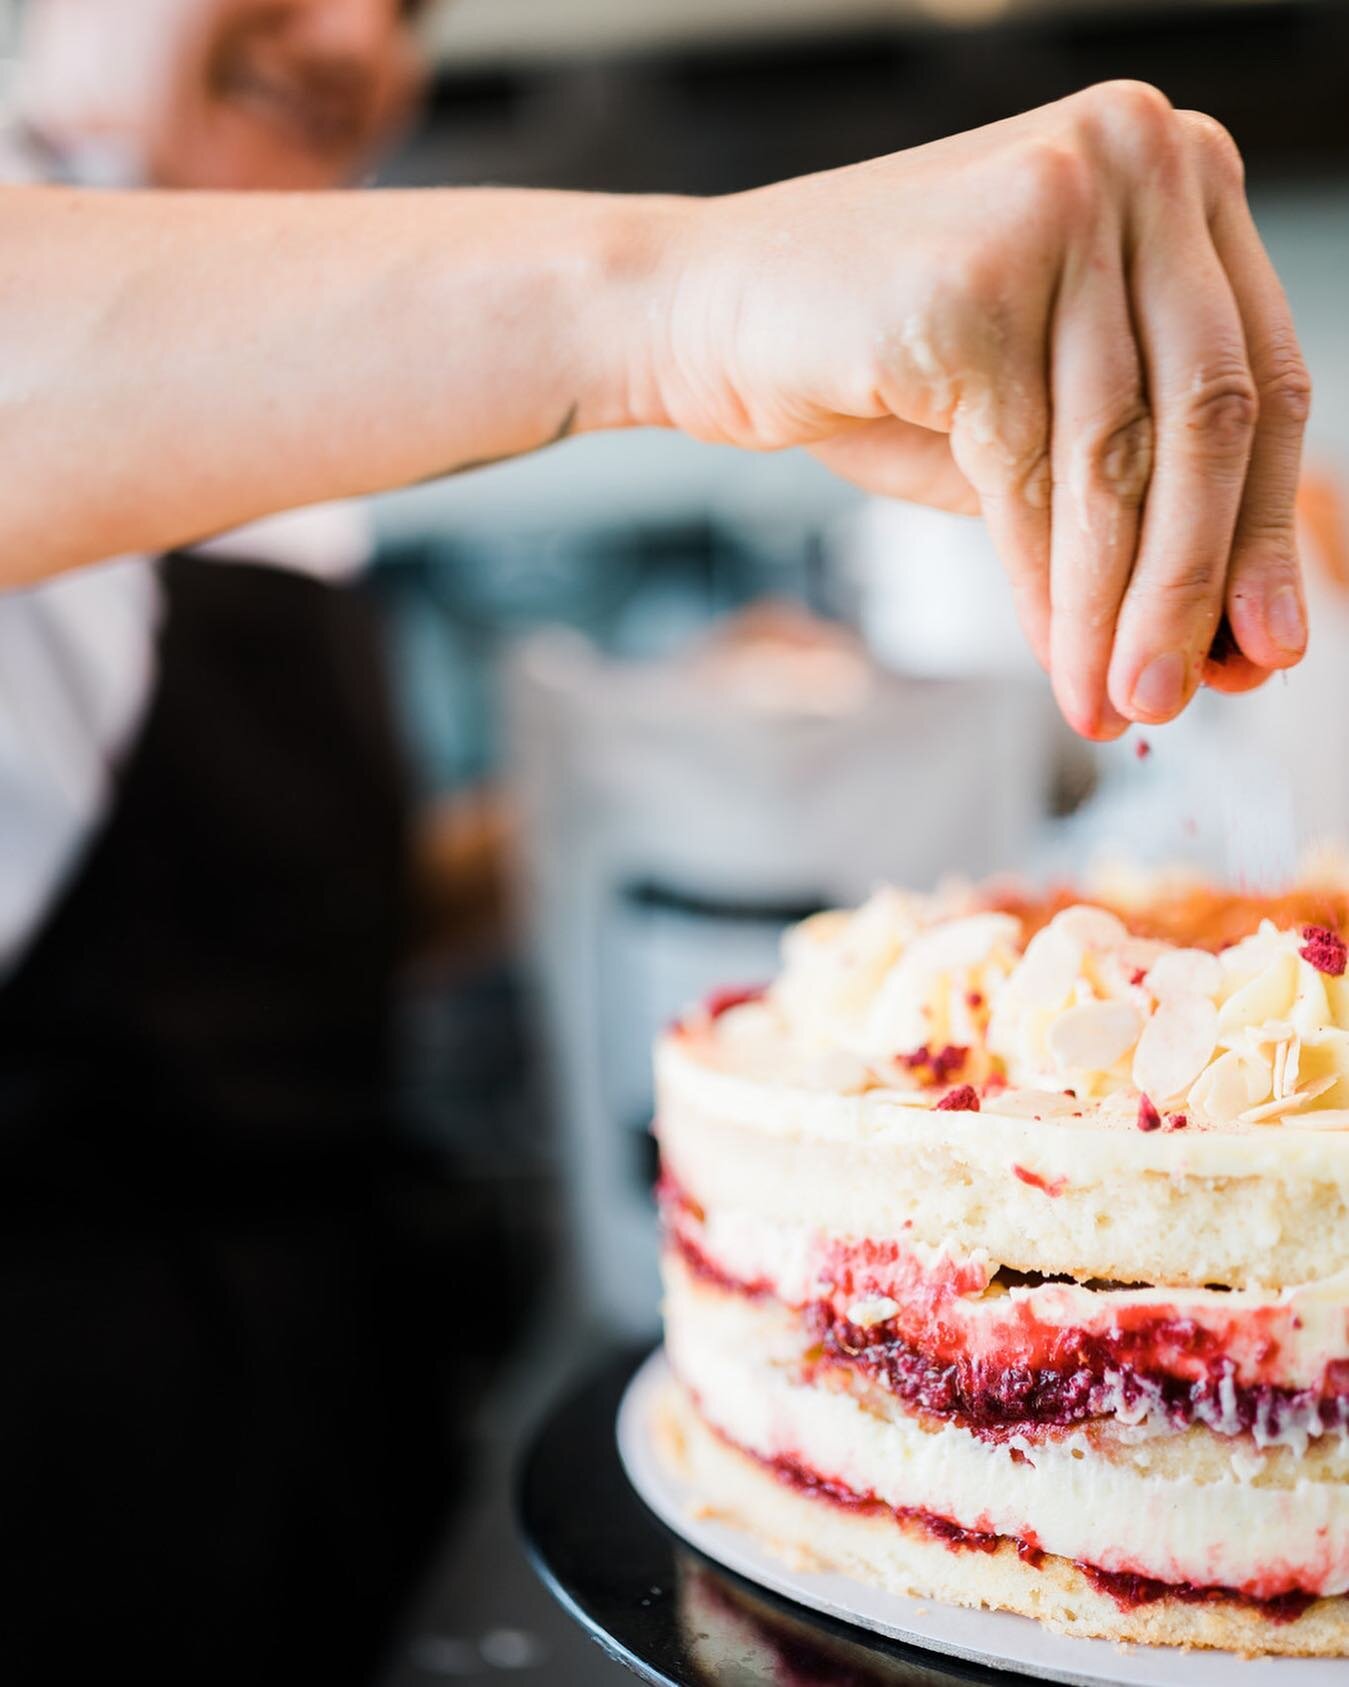 Putting the finishing touches on our famous peach and raspberry melba... 
⠀⠀⠀⠀⠀⠀⠀⠀⠀
If you have a special occasion coming up, email enquiries@vanscafe.com.au and we'll custom create something to fit your taste, vision and dietary requirements. 🍰